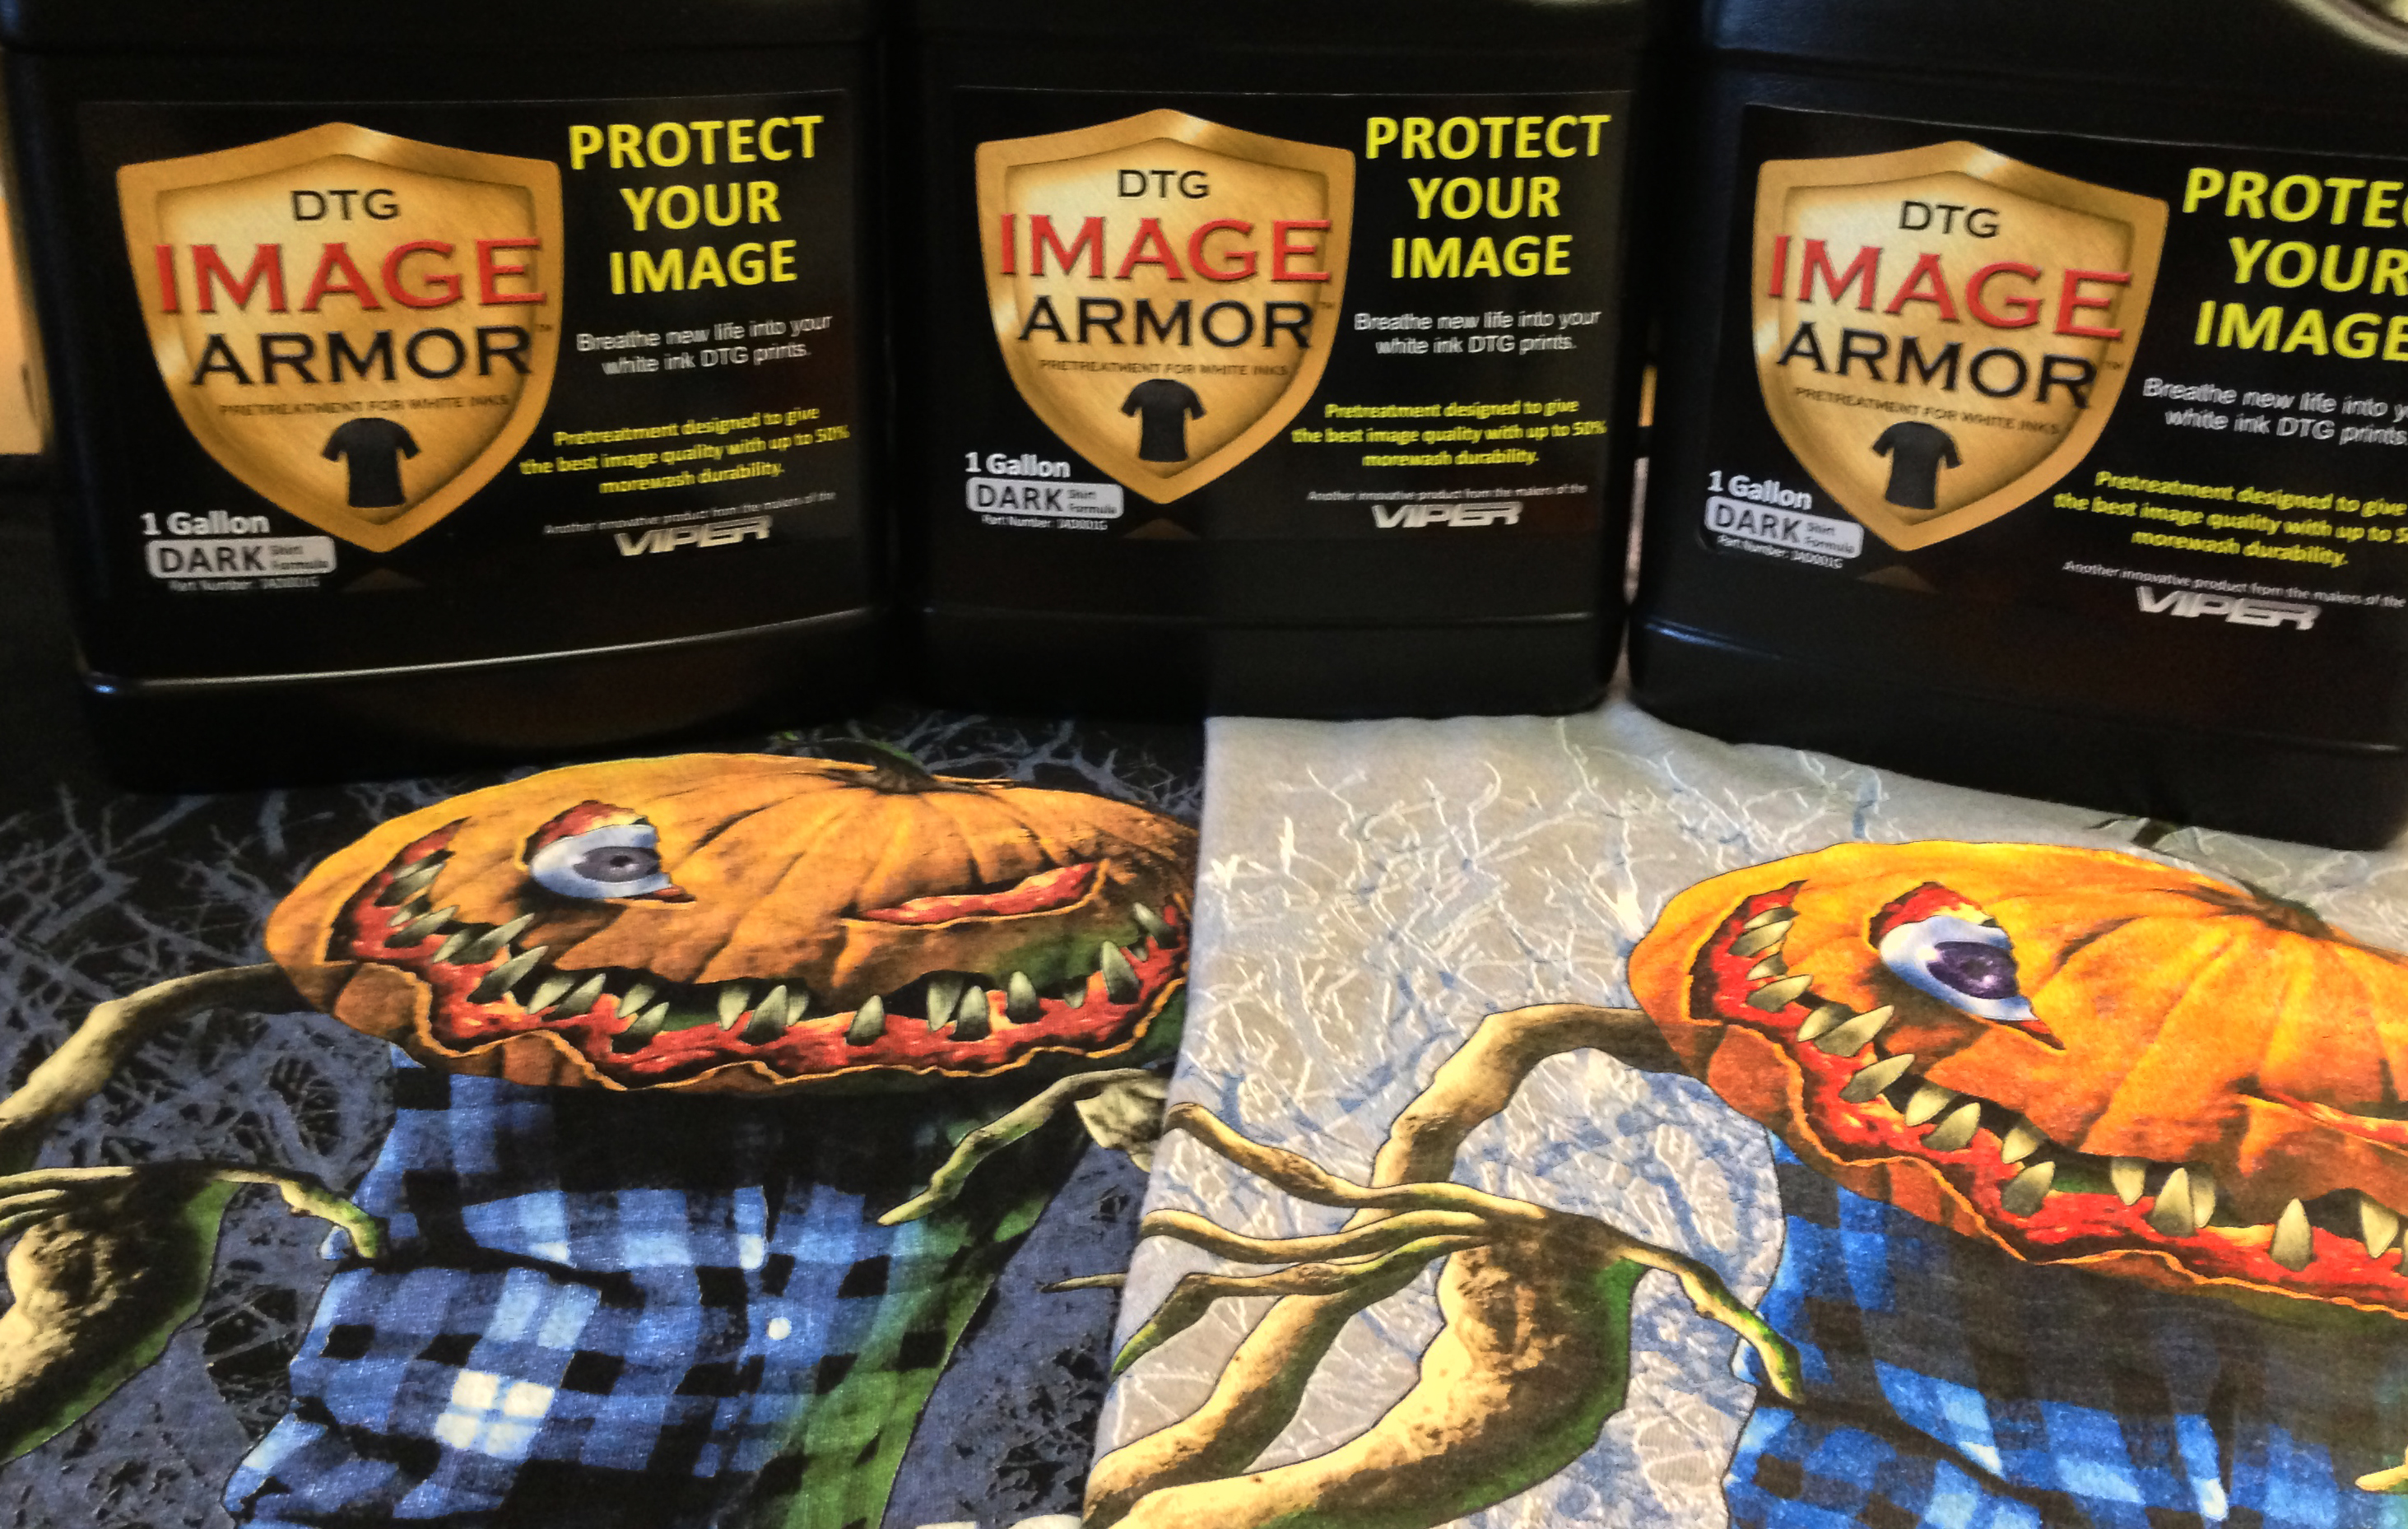 Image Armor Halloween Special Launch